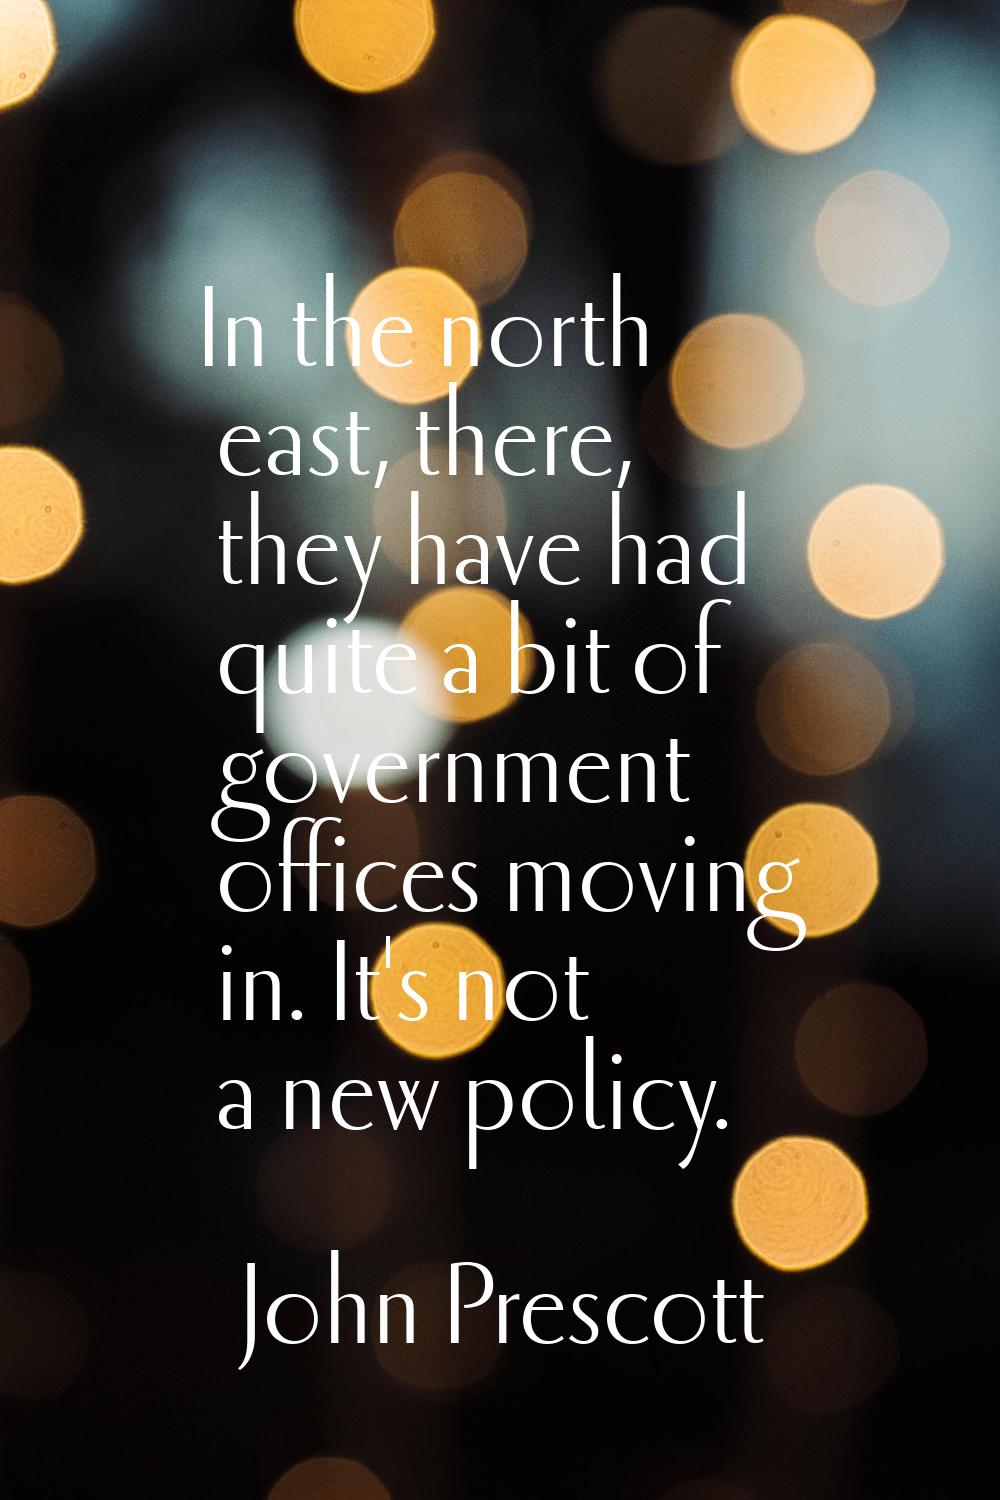 In the north east, there, they have had quite a bit of government offices moving in. It's not a new